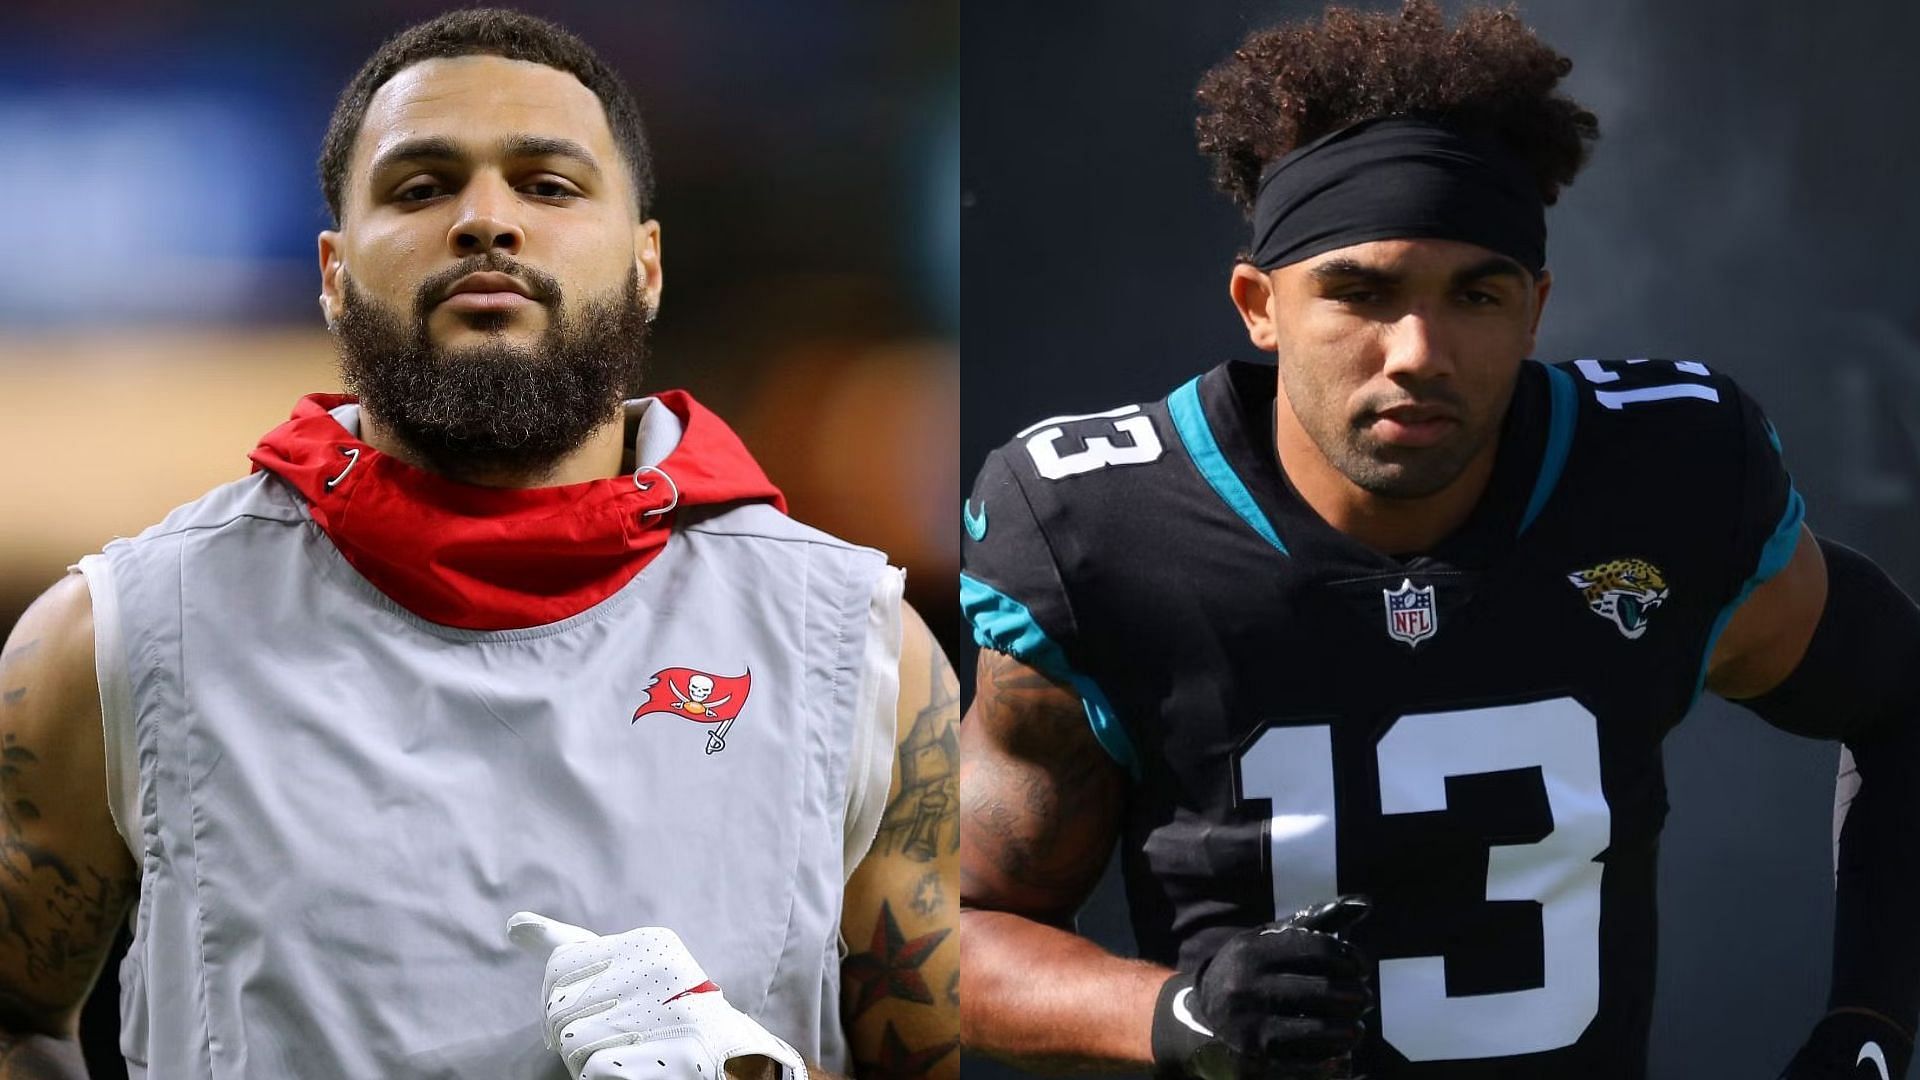 Who among Mike Evans and Christian Kirk offers the better fantasy football value?